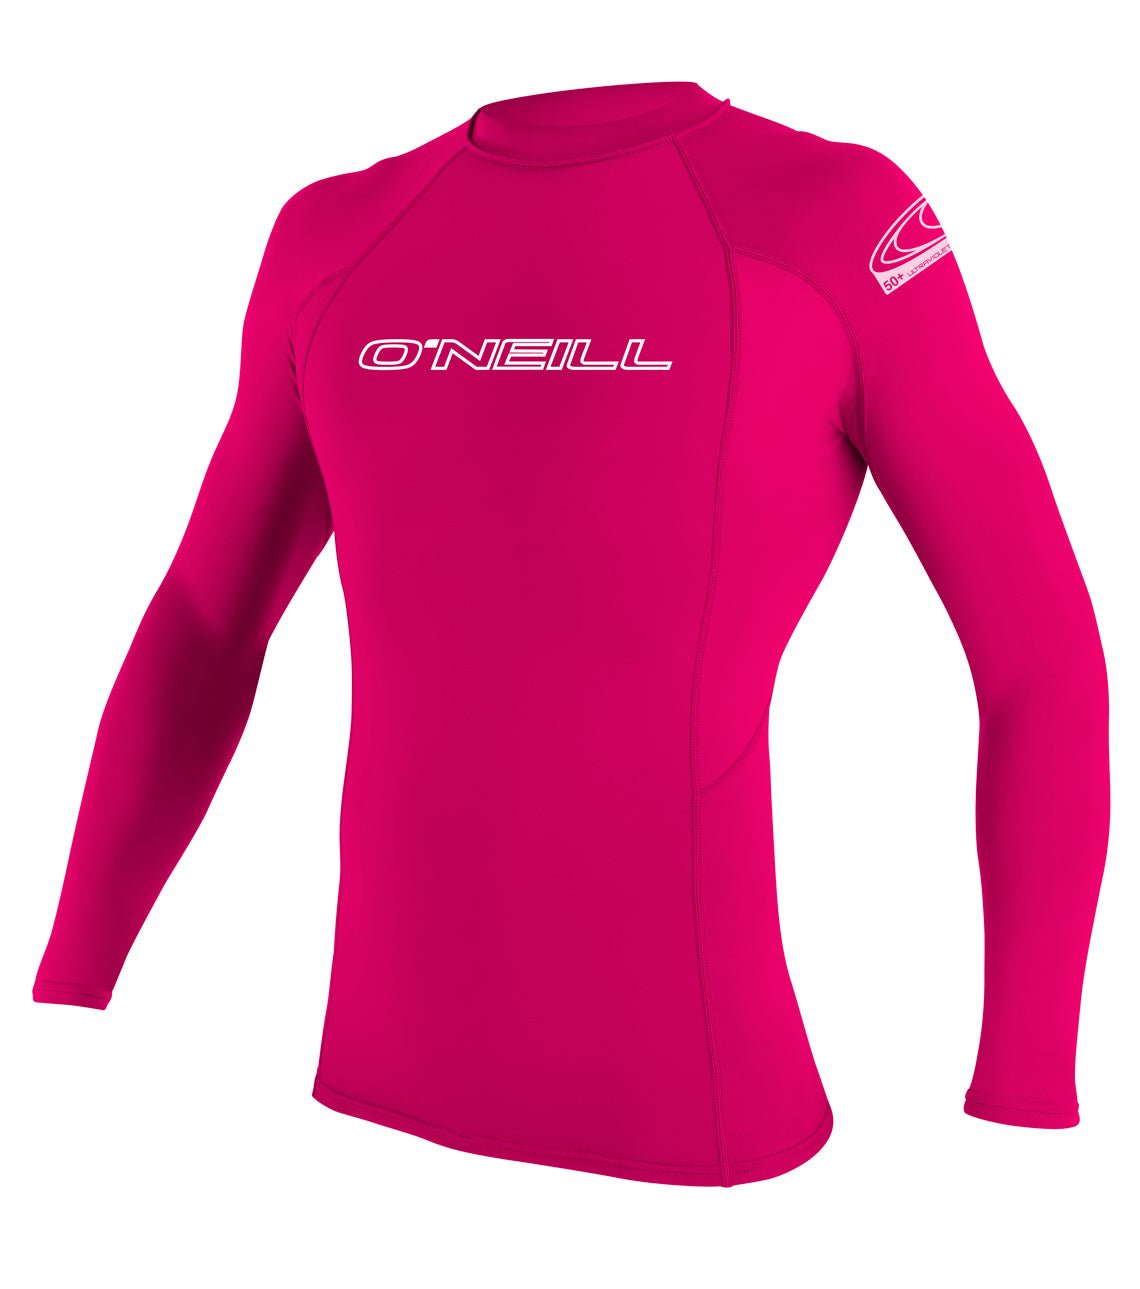 O'Neill Youth Basic Skins L/S Rash Guard - Worthing Watersports - 3346-182-4 - Tops - O'Neill